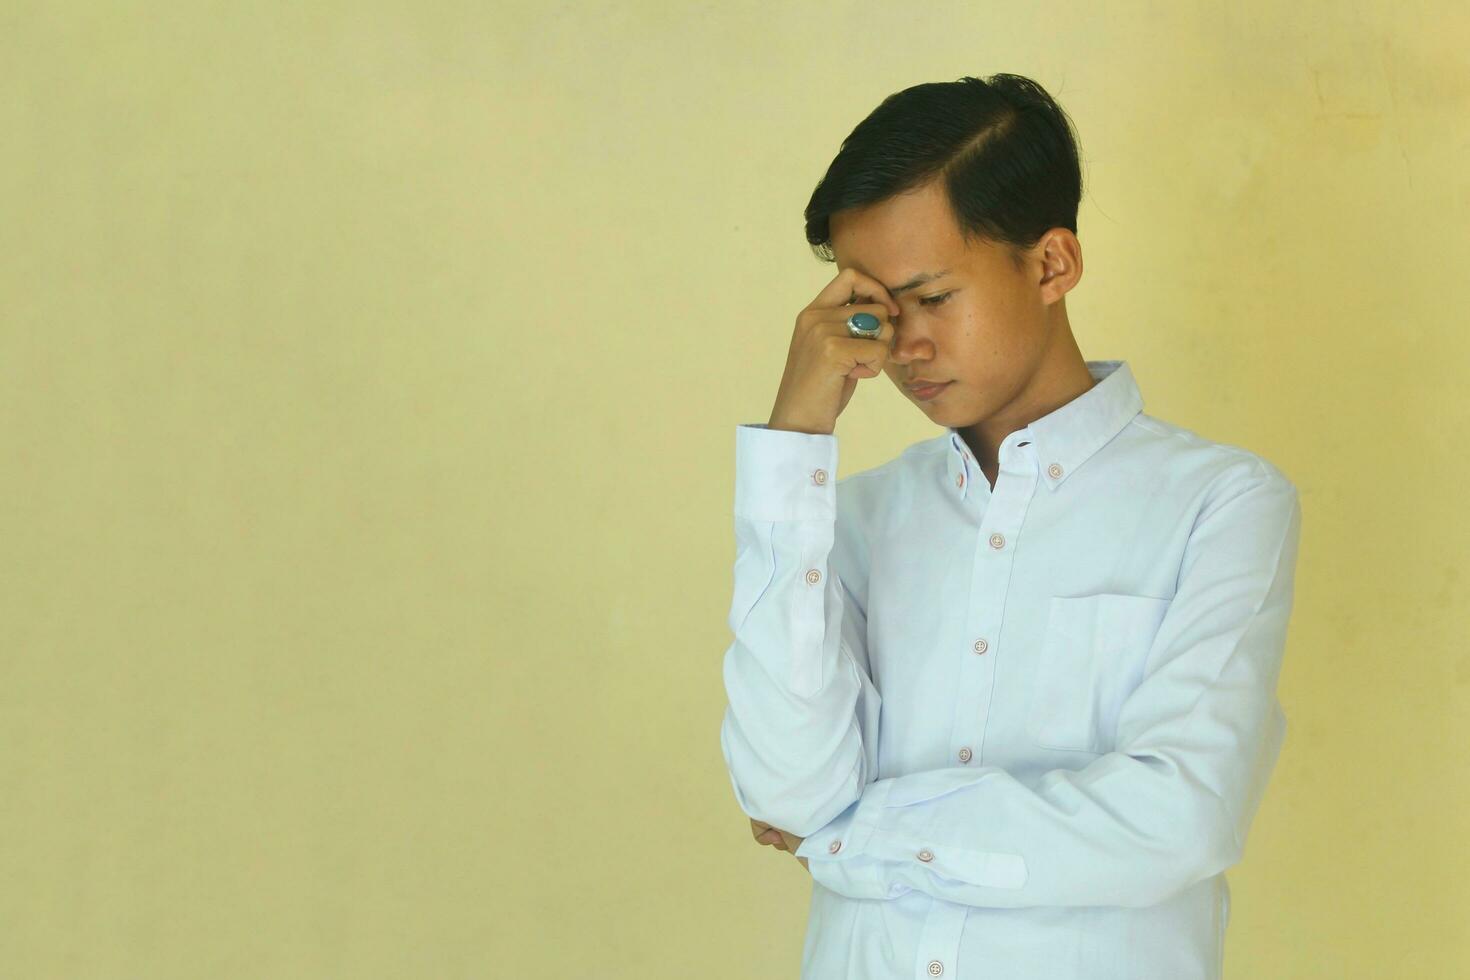 the confused, stressed, and disappointed face of the Asian youth in white.  movement of the hands over the head. photo